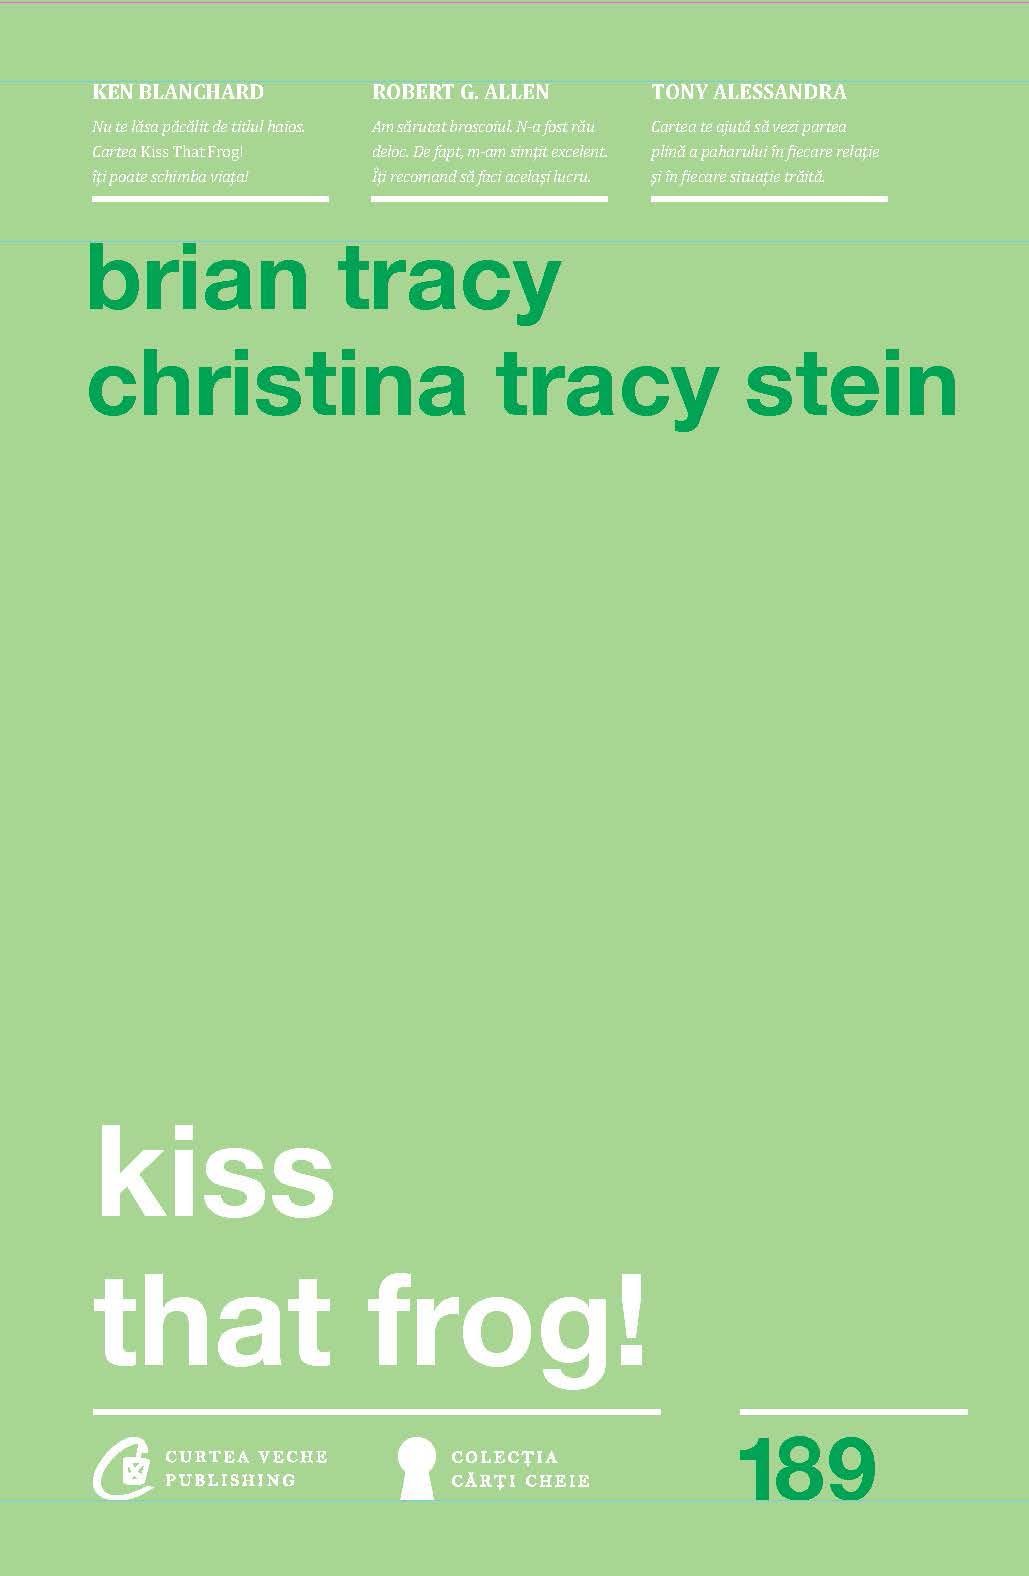 Kiss that frog! - Brian Tracy, Christina Tracy Stein